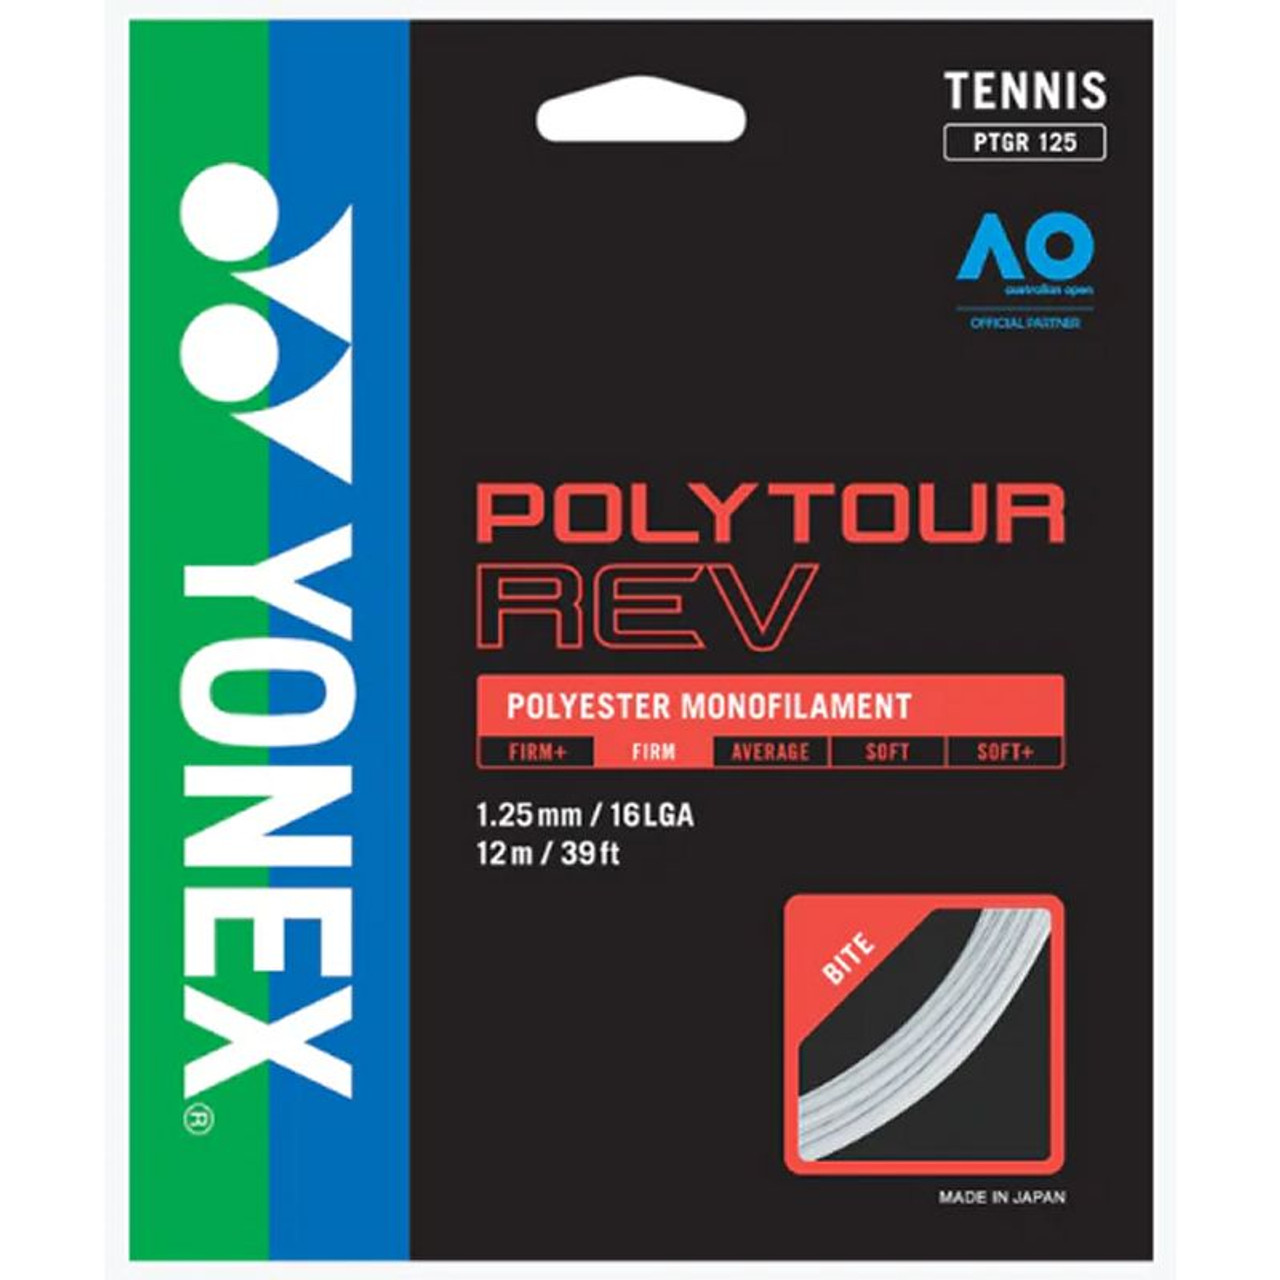 Yonex Poly Tour REV 16L is a highly durable polyester tennis string